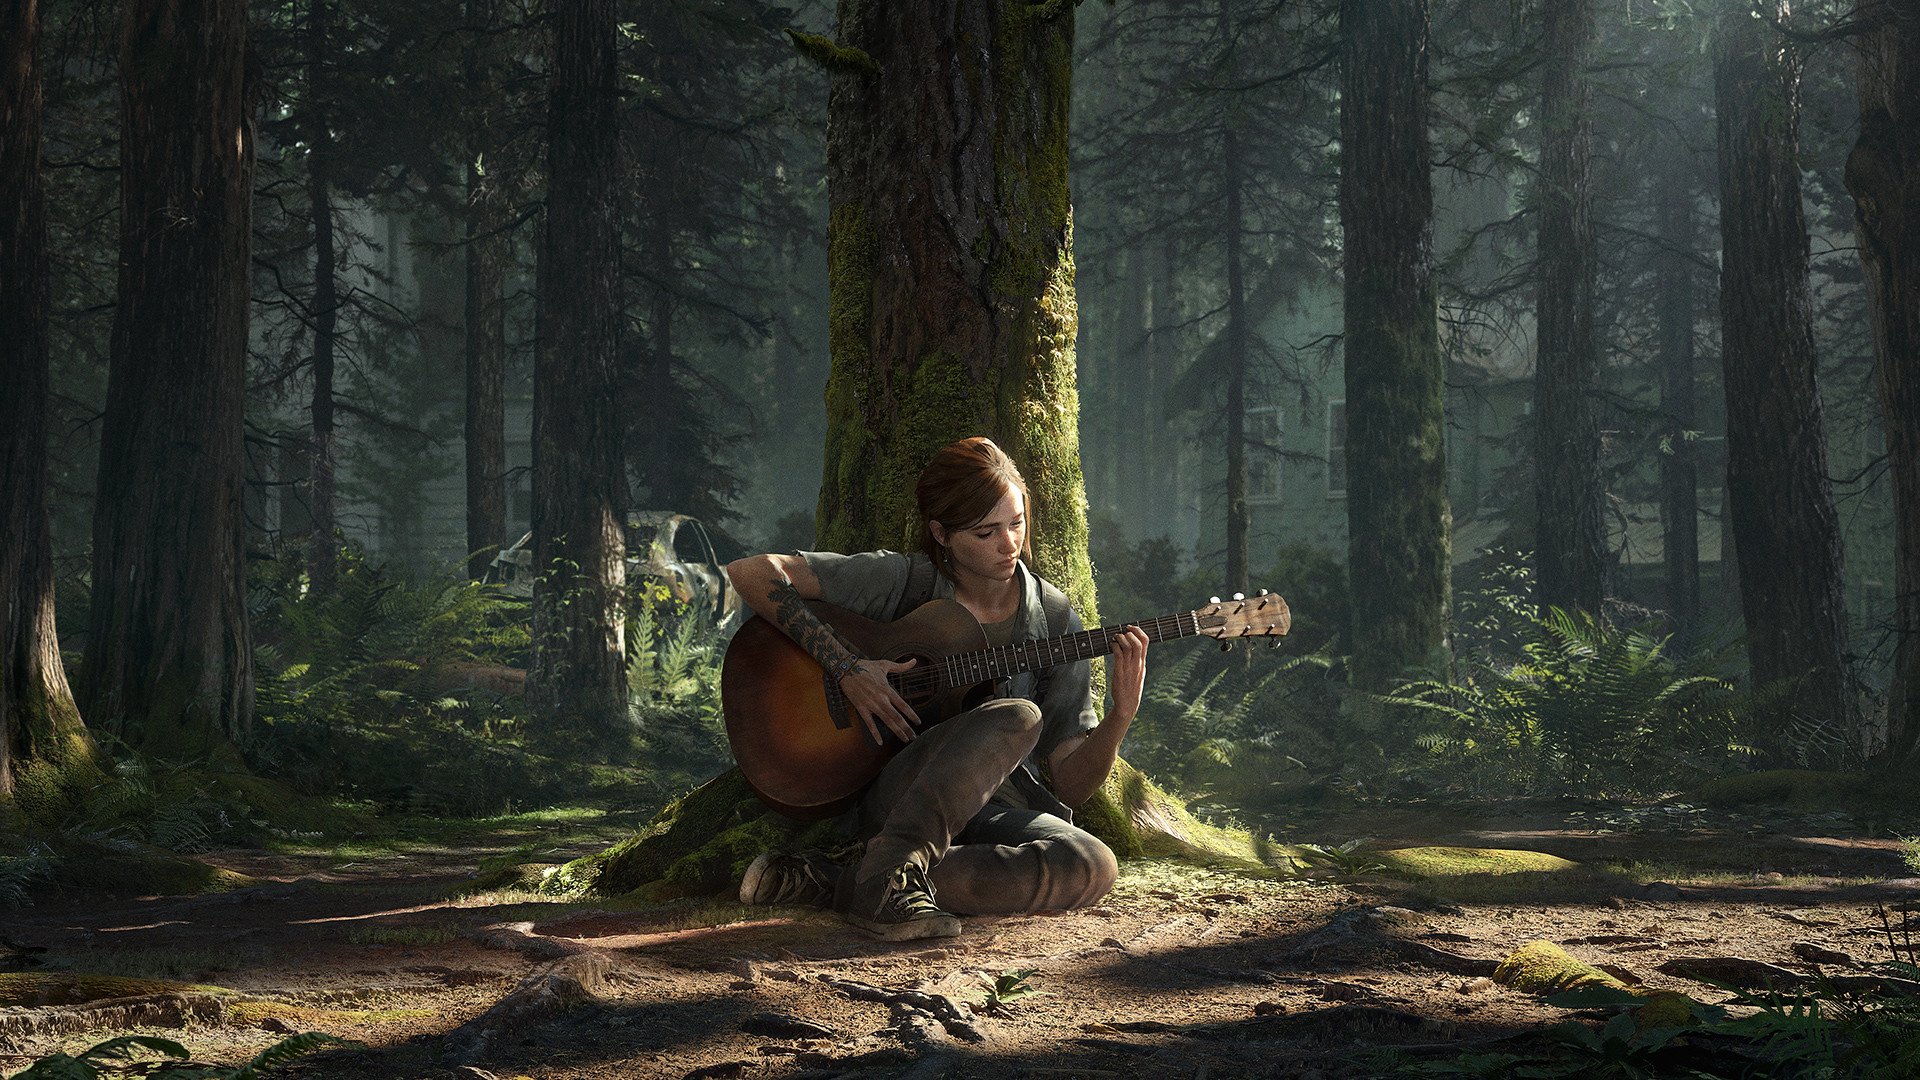 Elli playing guitar under a tree in The Last of Us 2